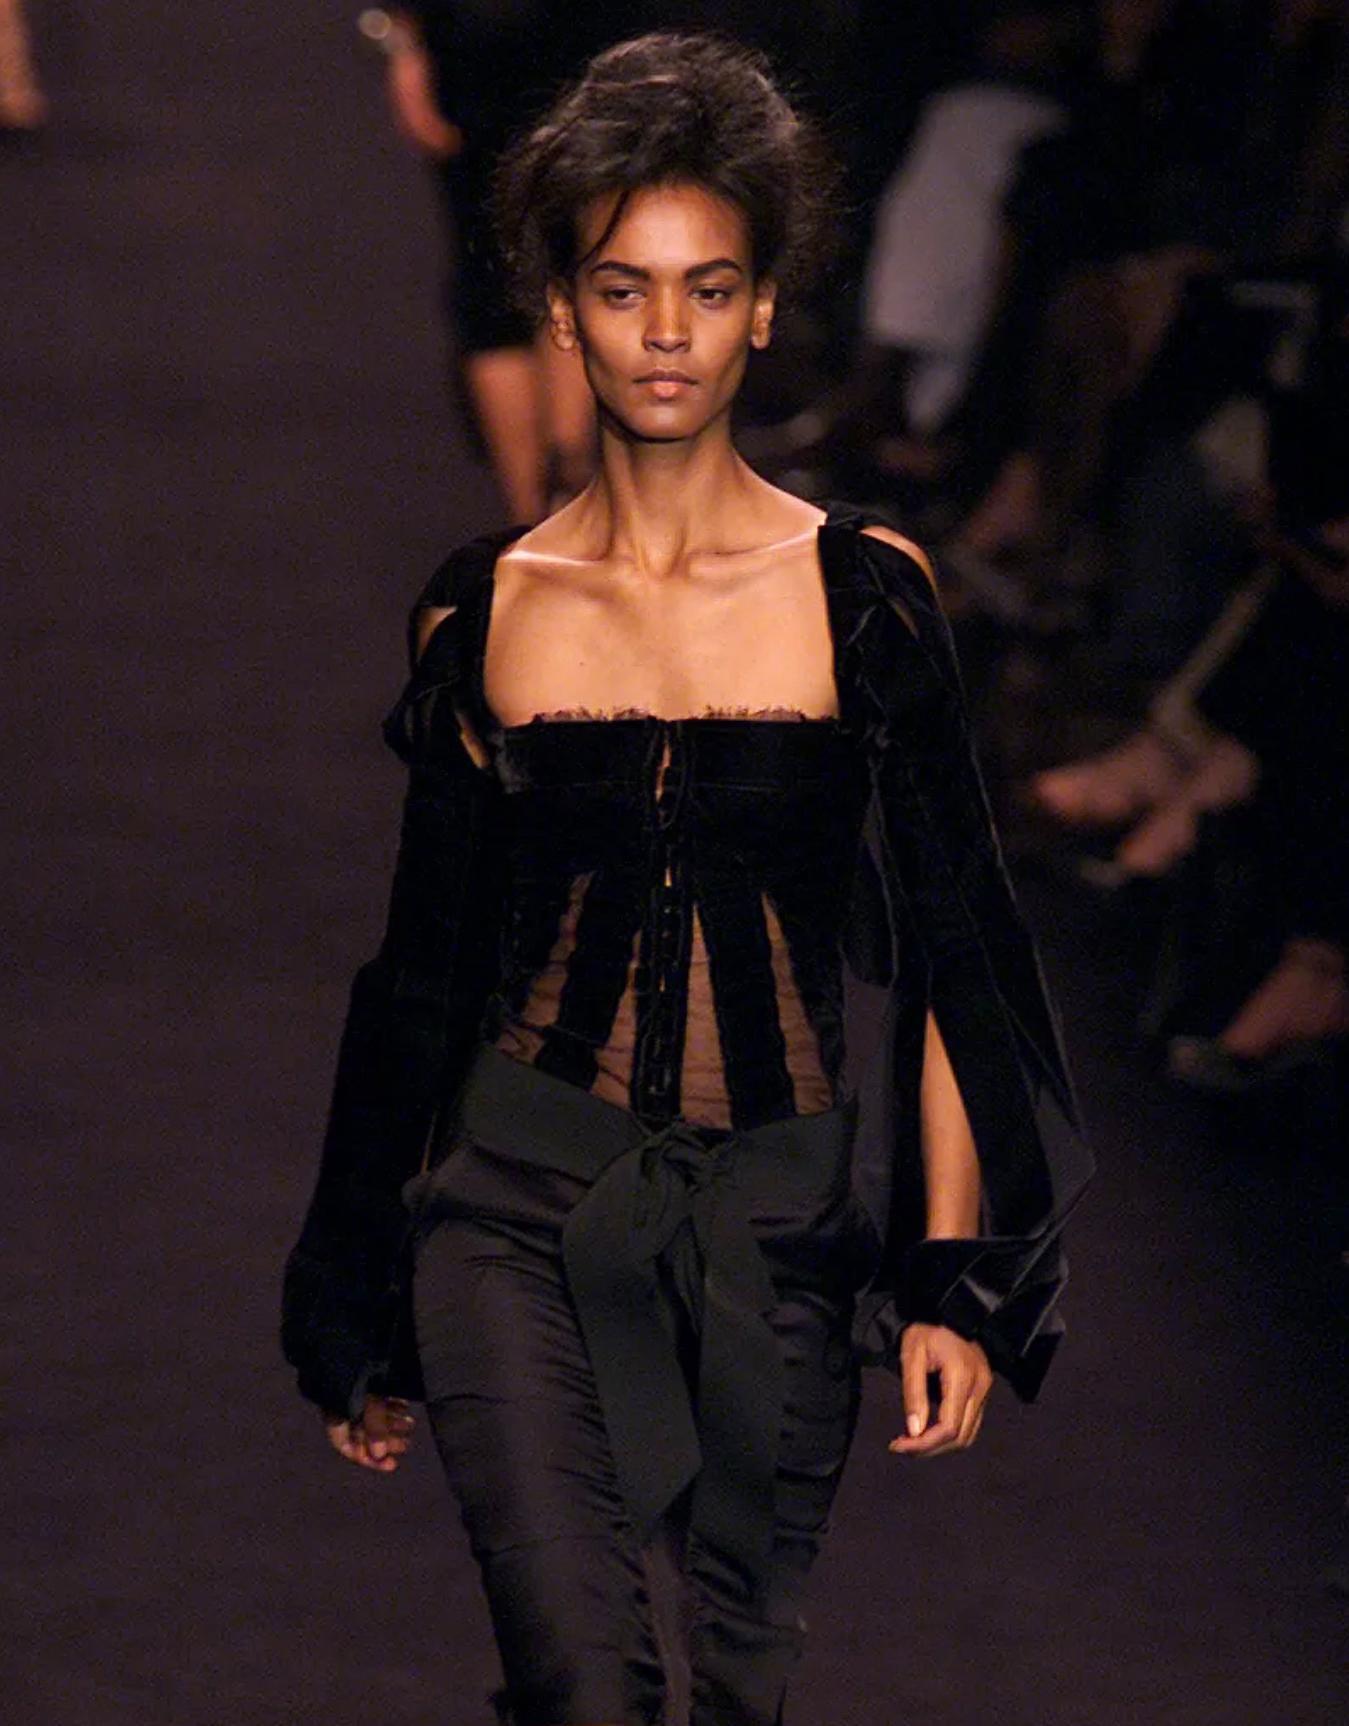 
SHOWSTOPPER

Iconic Runway Tom Ford for Yves Saint Laurent Ensemble F/W 2002 Collection

Two piece set made of pure Silk (corset top and skirt) TOM FORD for YVES SANT LAURENT

The corset top crafted from panels of high quality black velvet fabric